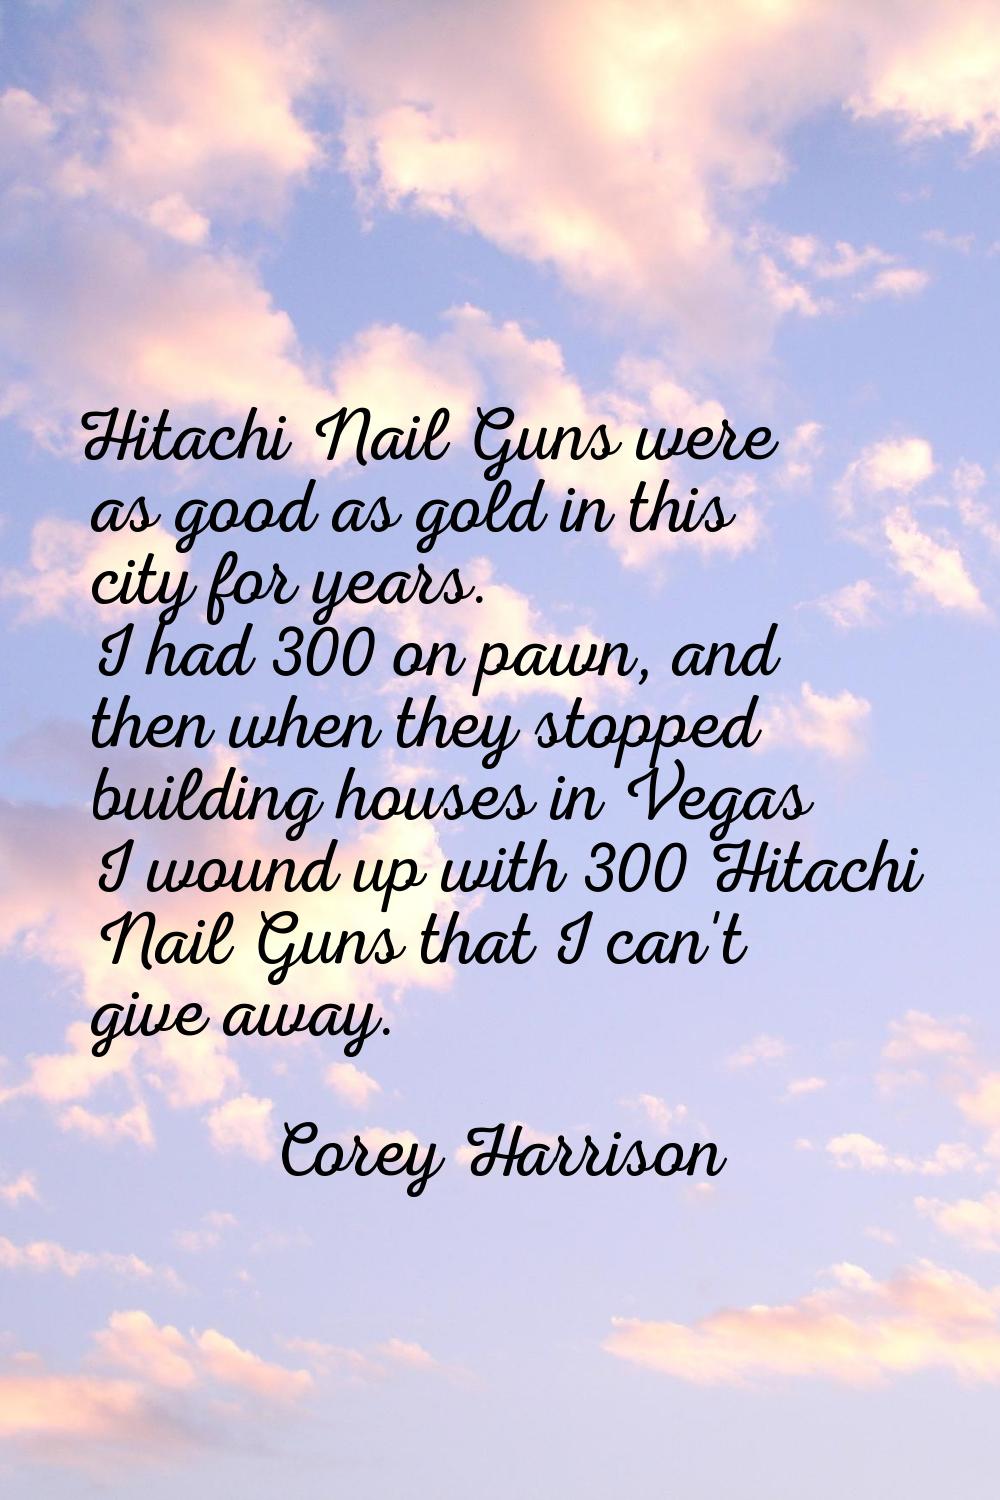 Hitachi Nail Guns were as good as gold in this city for years. I had 300 on pawn, and then when the